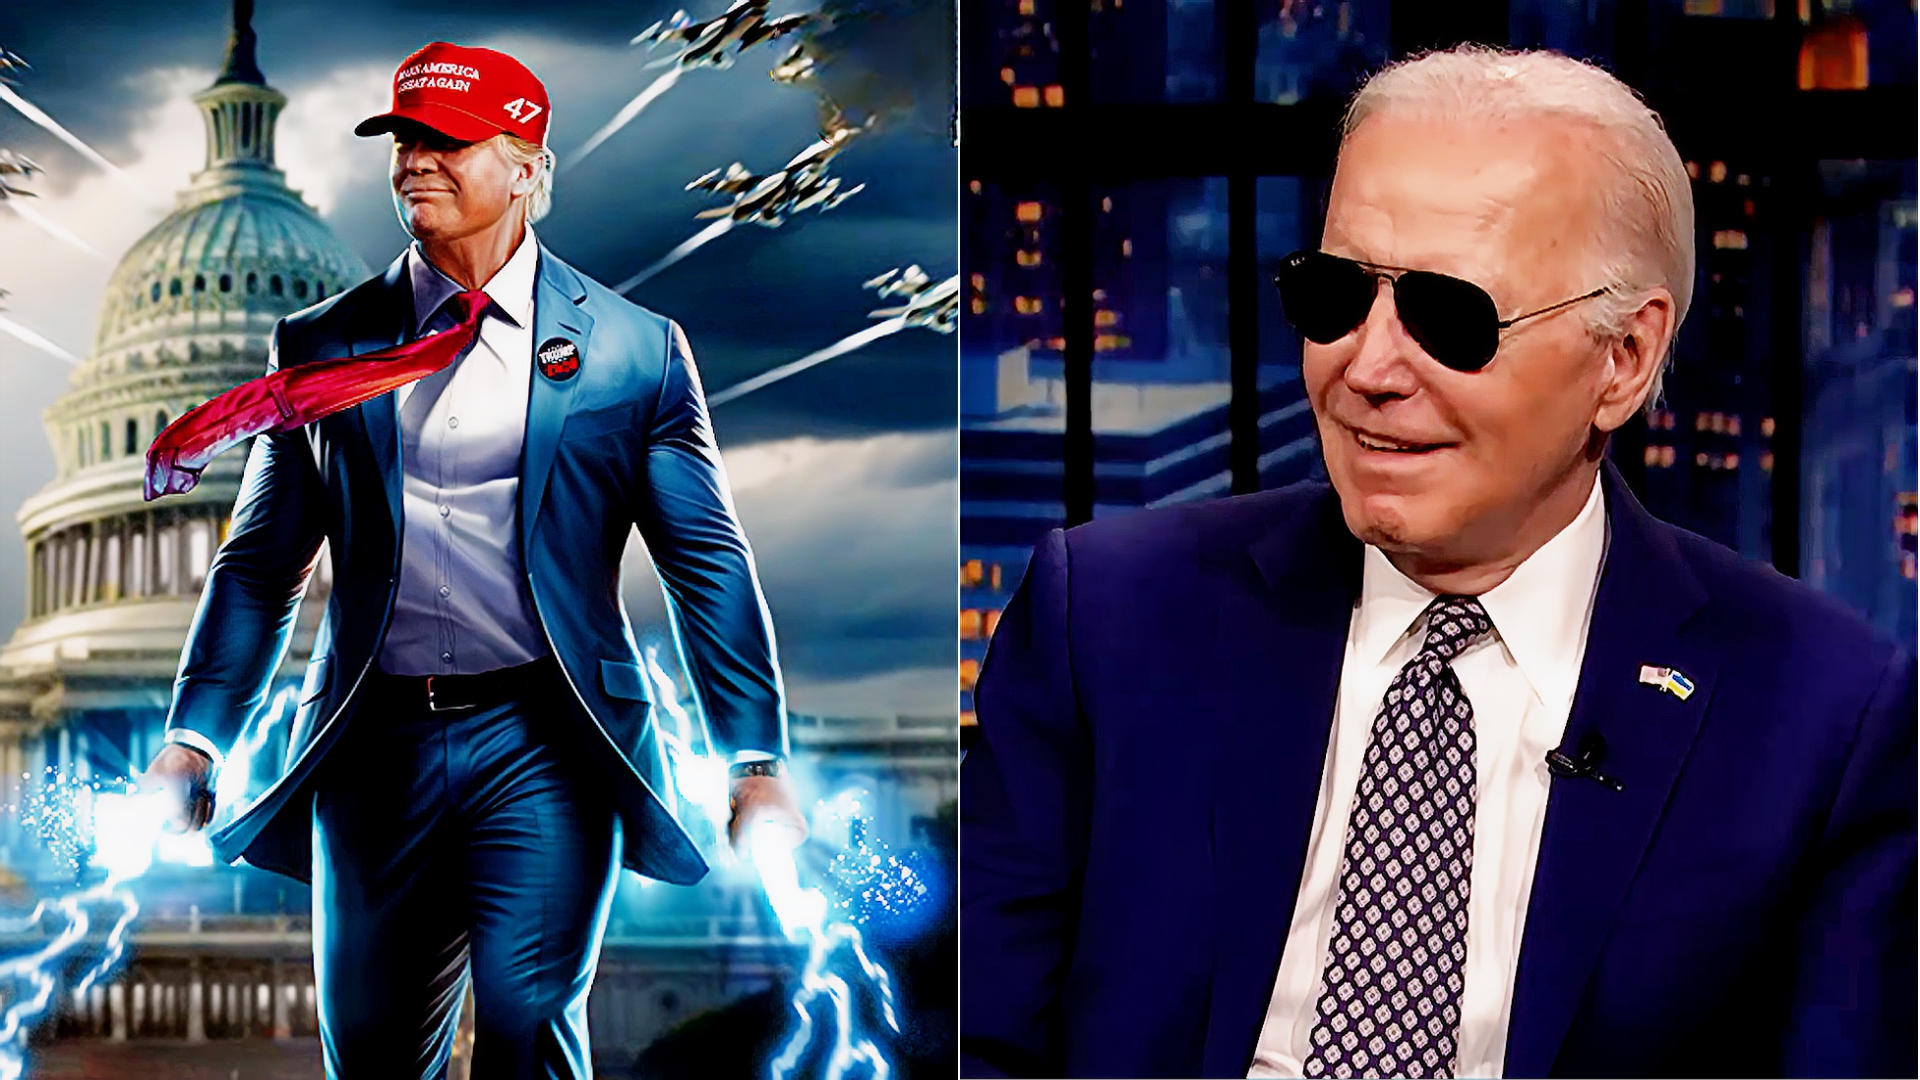 Biden Camp Roasts Trump Dinner With Fans ‘Suckered Into Paying’ For NFT Trading Cards On Day Off From Court